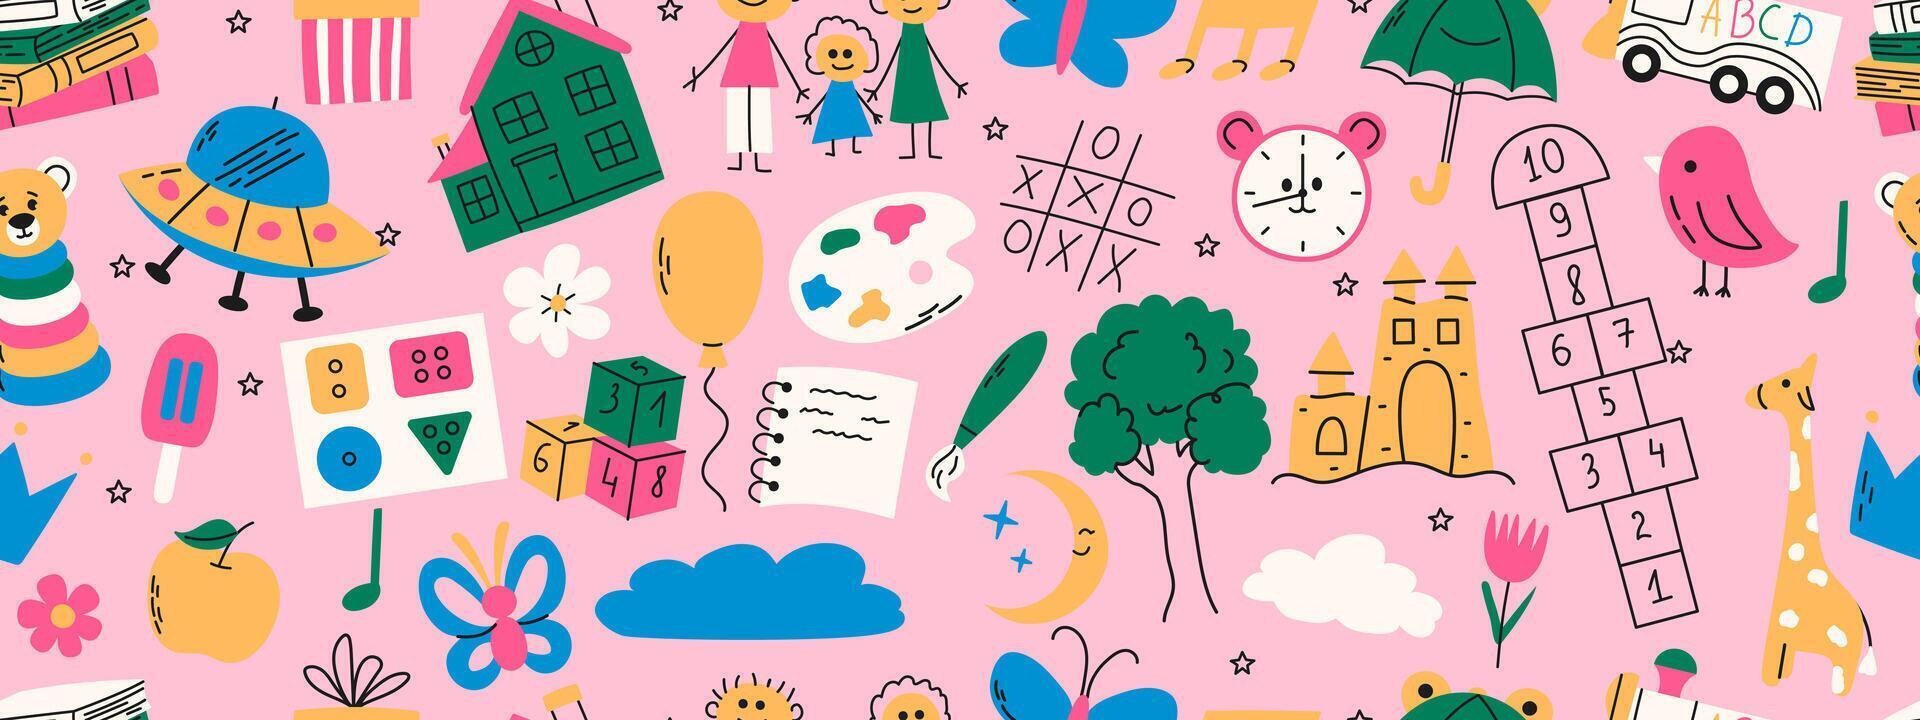 Colorful seamless pattern with daycare doodle. Book, hopscotch, toys, flower, umbrella, house, clock and other elements. vector